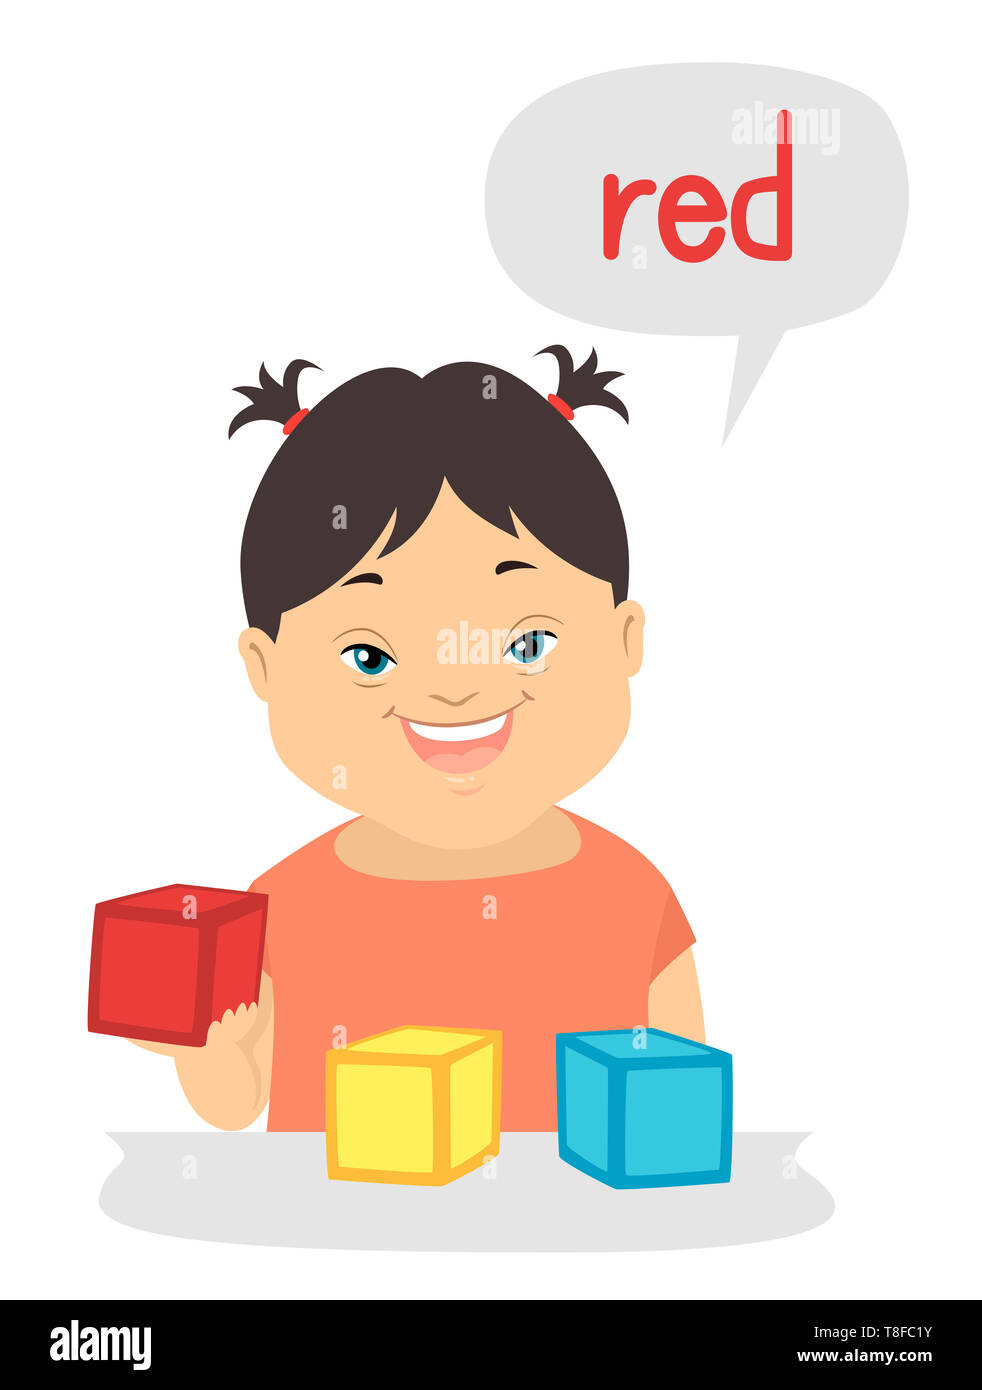 Illustration of a Kid Girl with Down Syndrome Describing the Colors of the Blocks Stock Photo